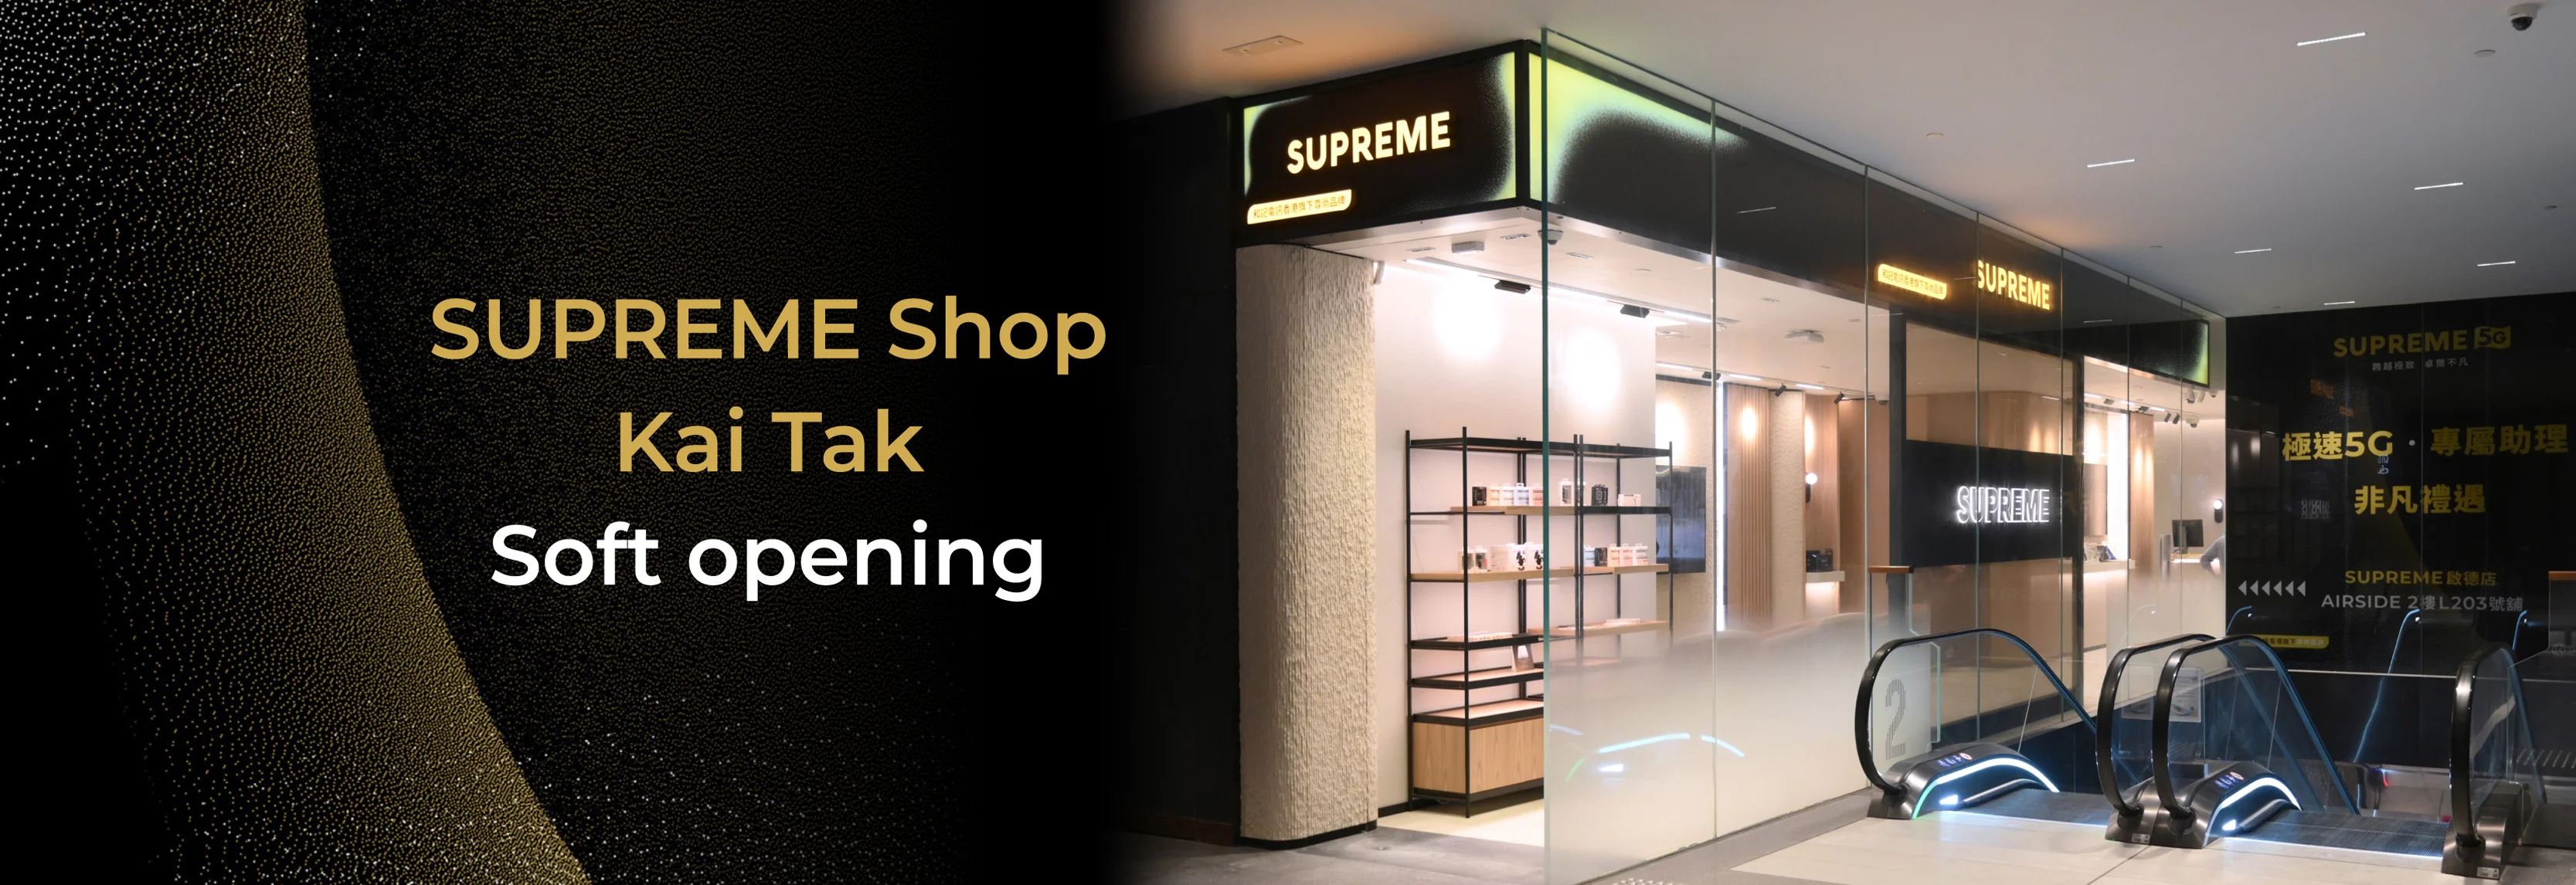 [The new SUPREME Shop at AIRSIDE, the new landmark mall in Kai Tak] 